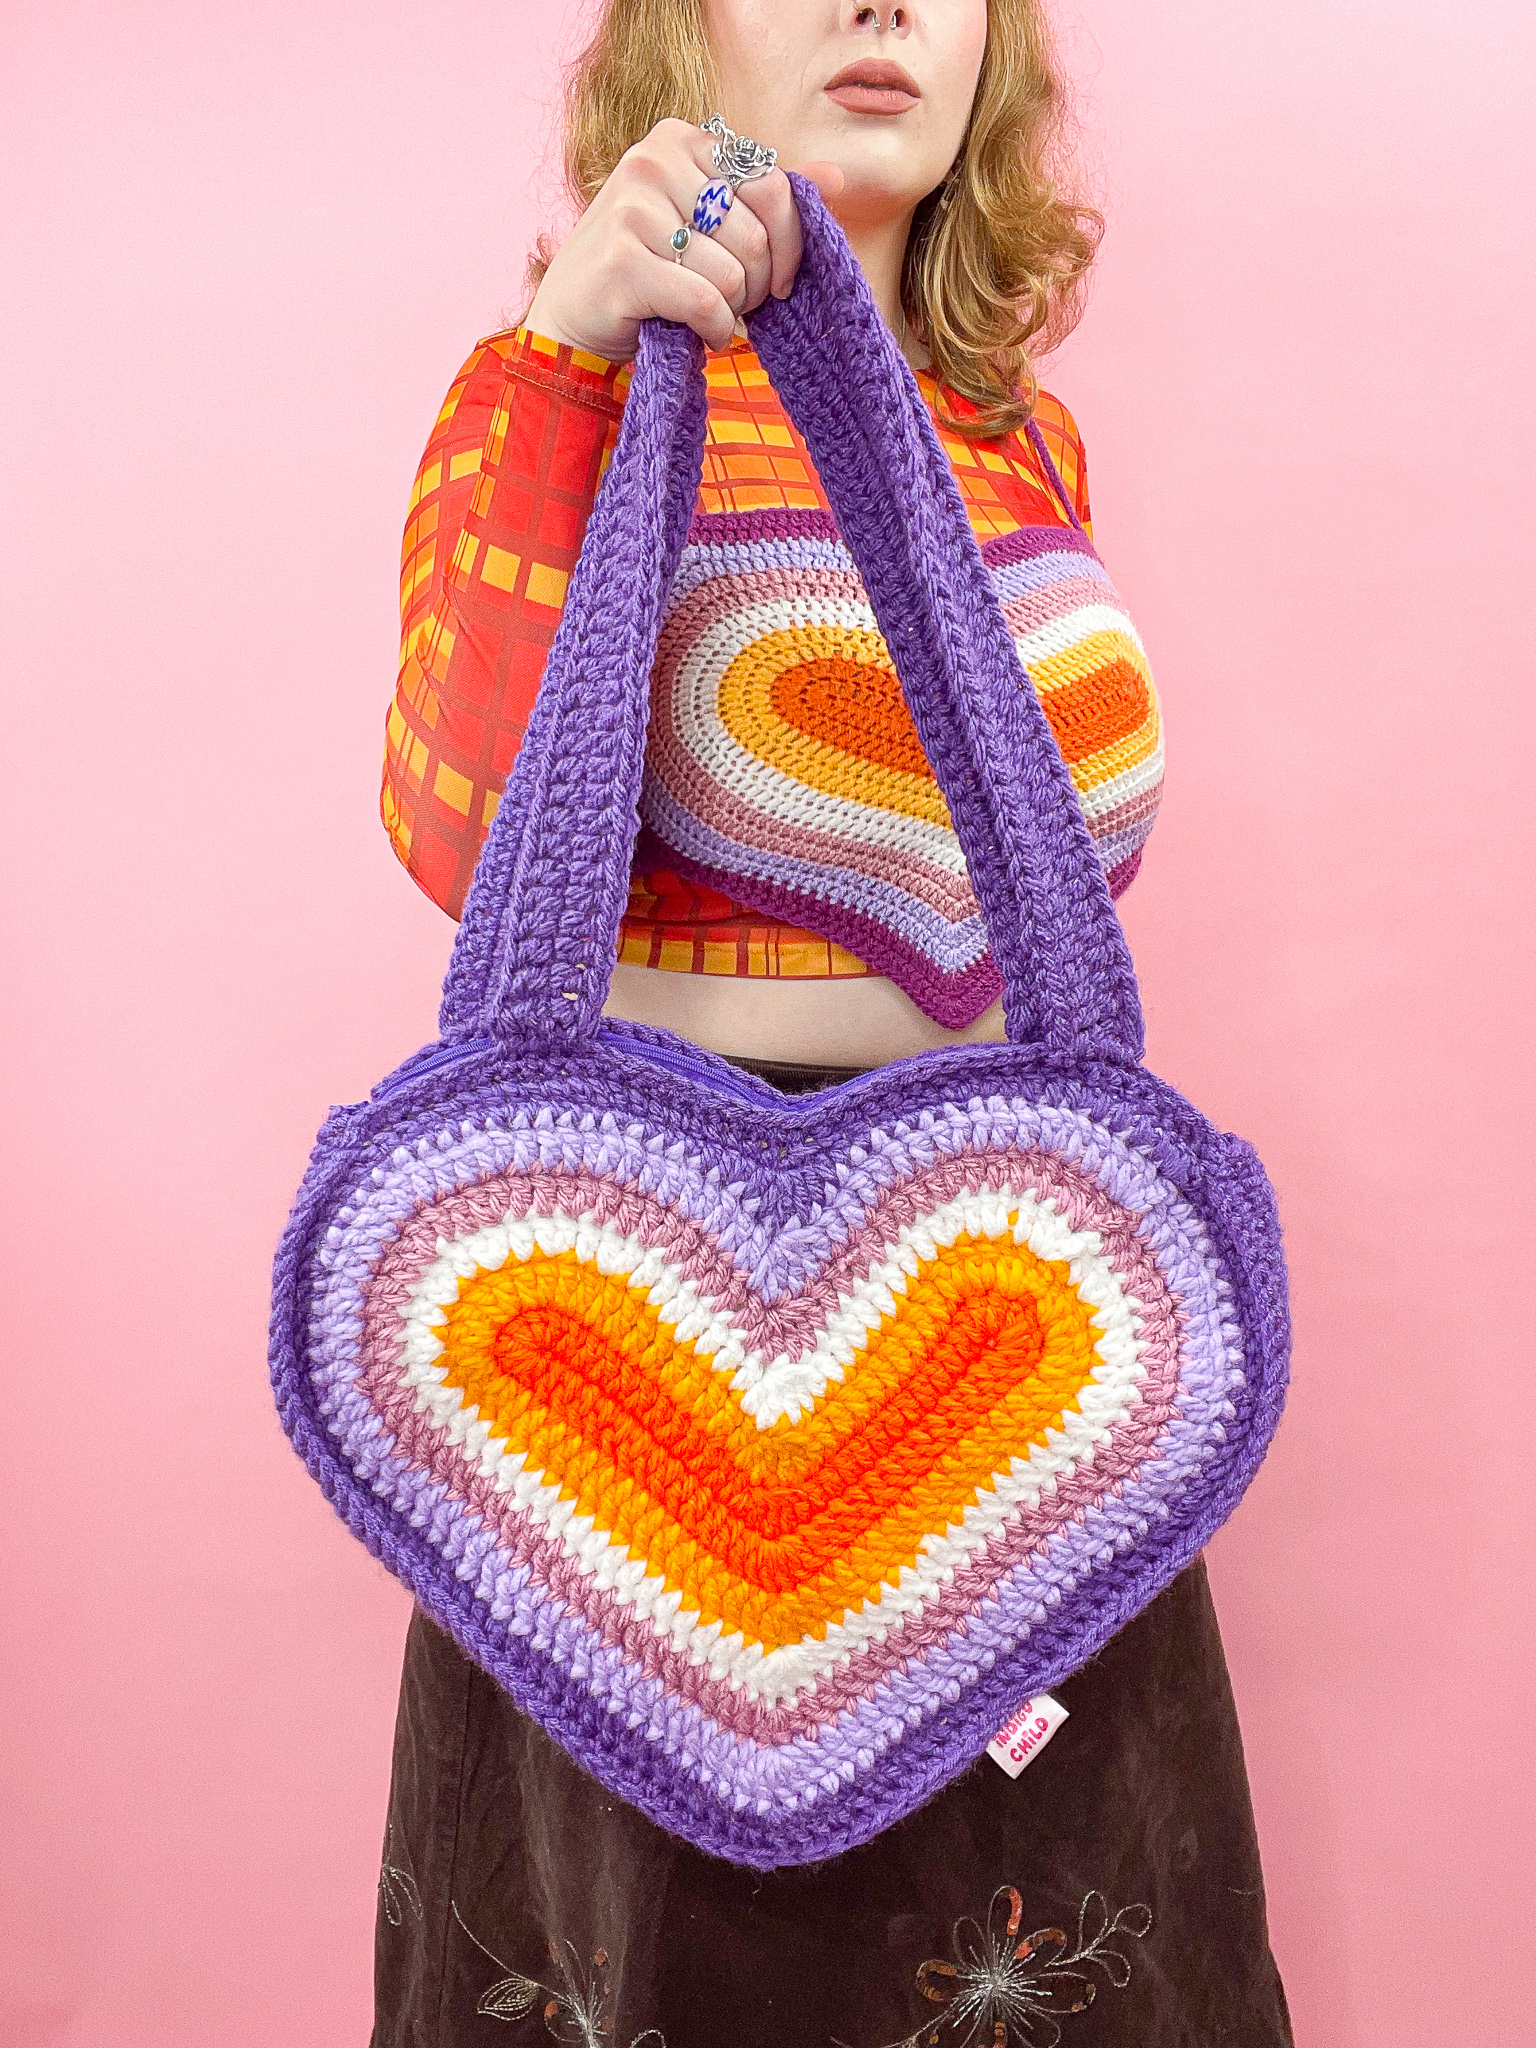 a woman holding a knitted heart shaped bag